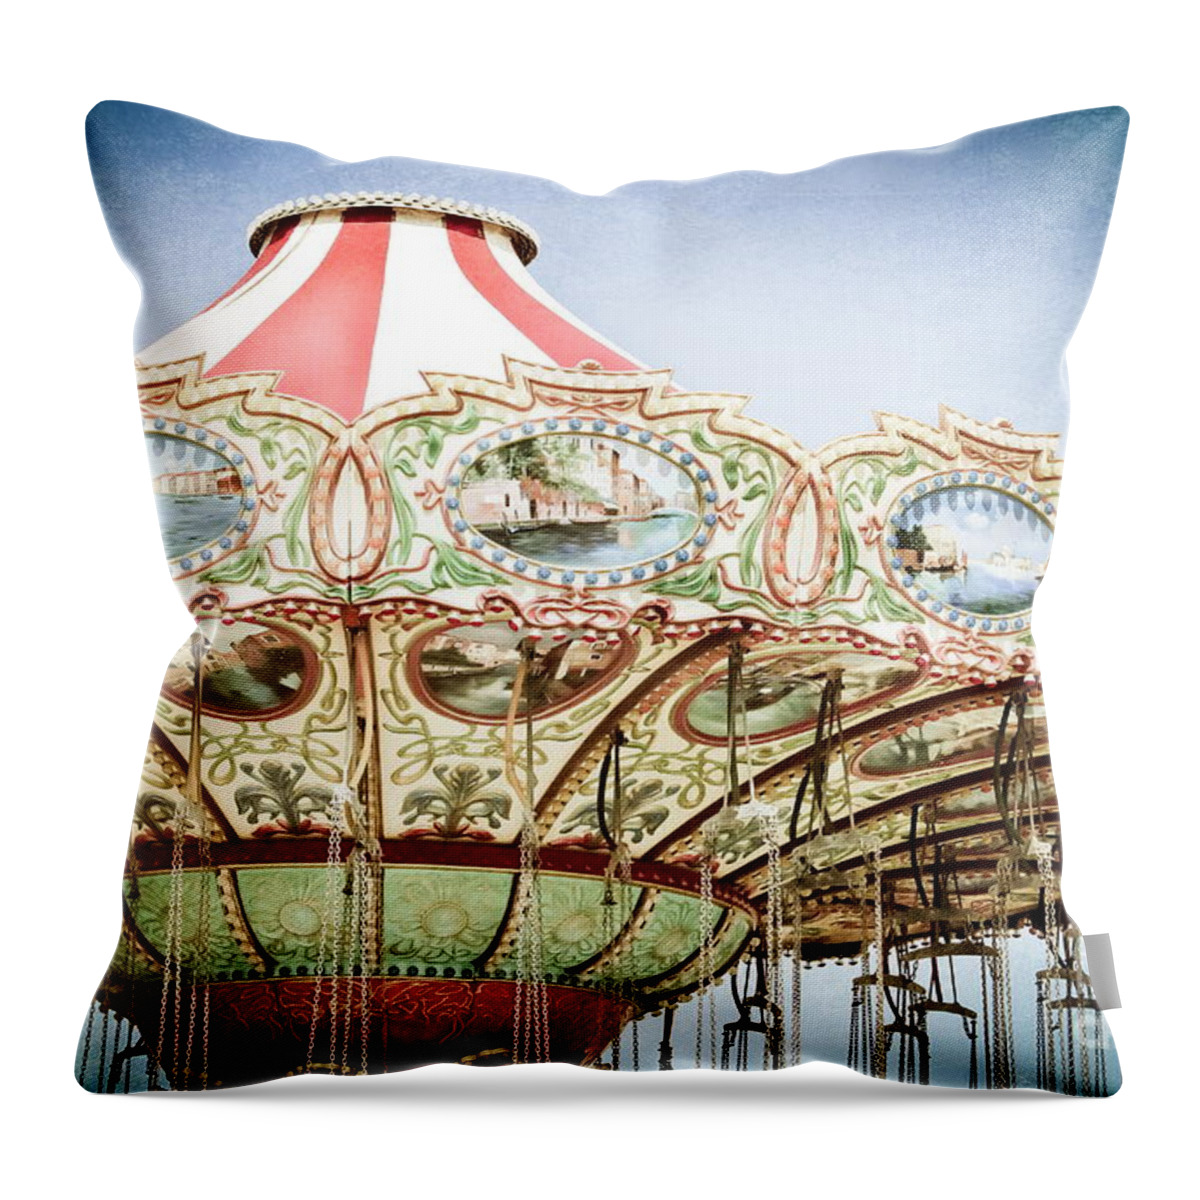 Carousel Top Throw Pillow featuring the photograph Carousel Top by Colleen Kammerer